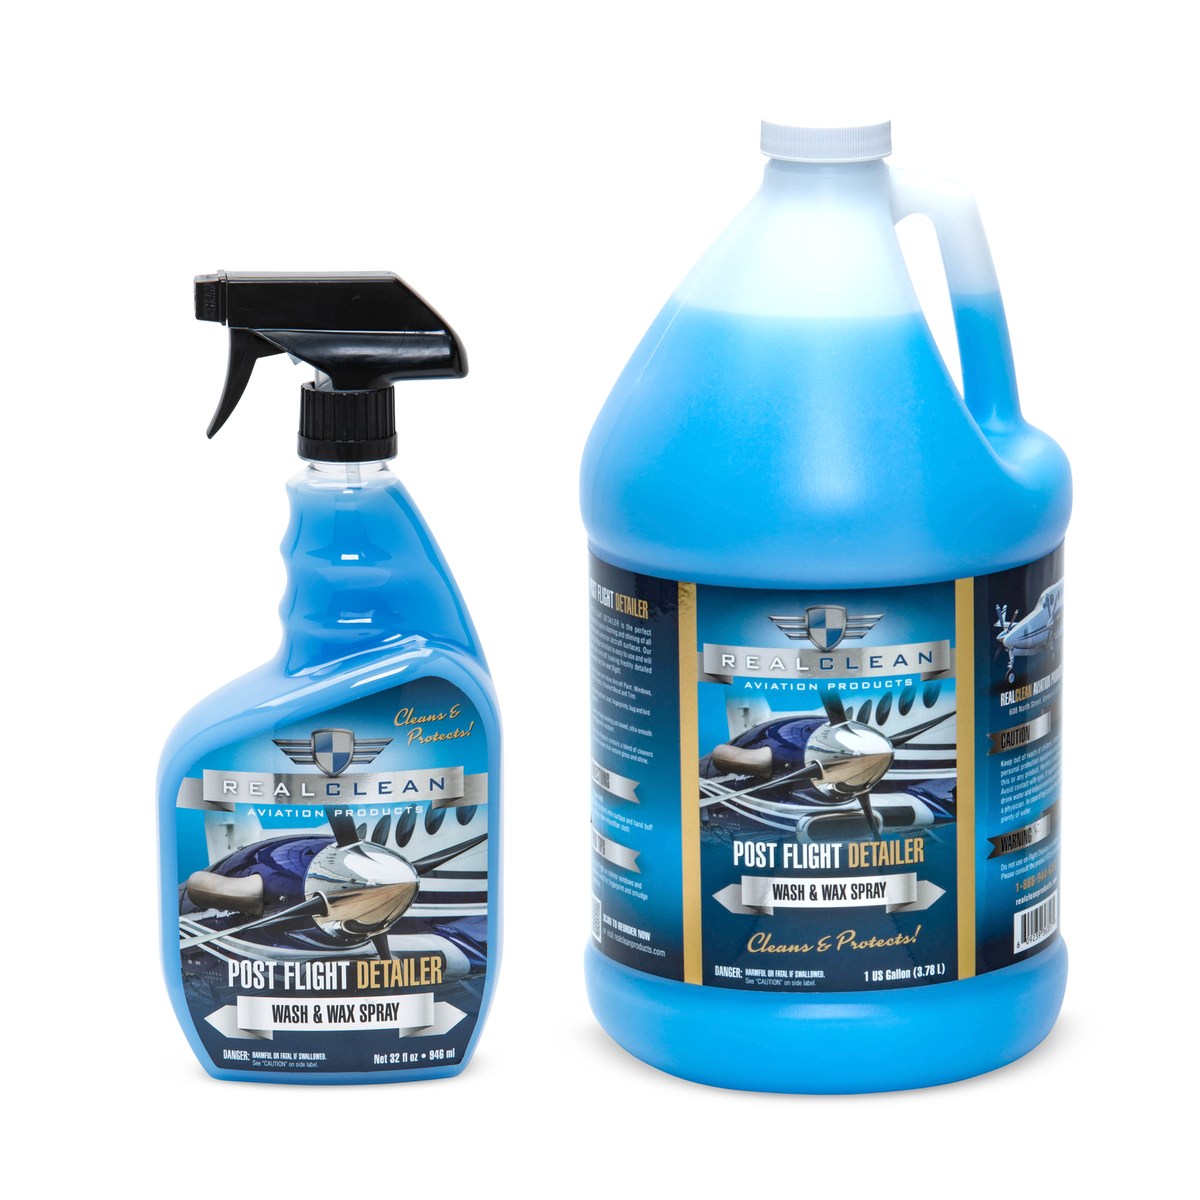 AirMart Aircraft Professional Detail Cleaning Kit